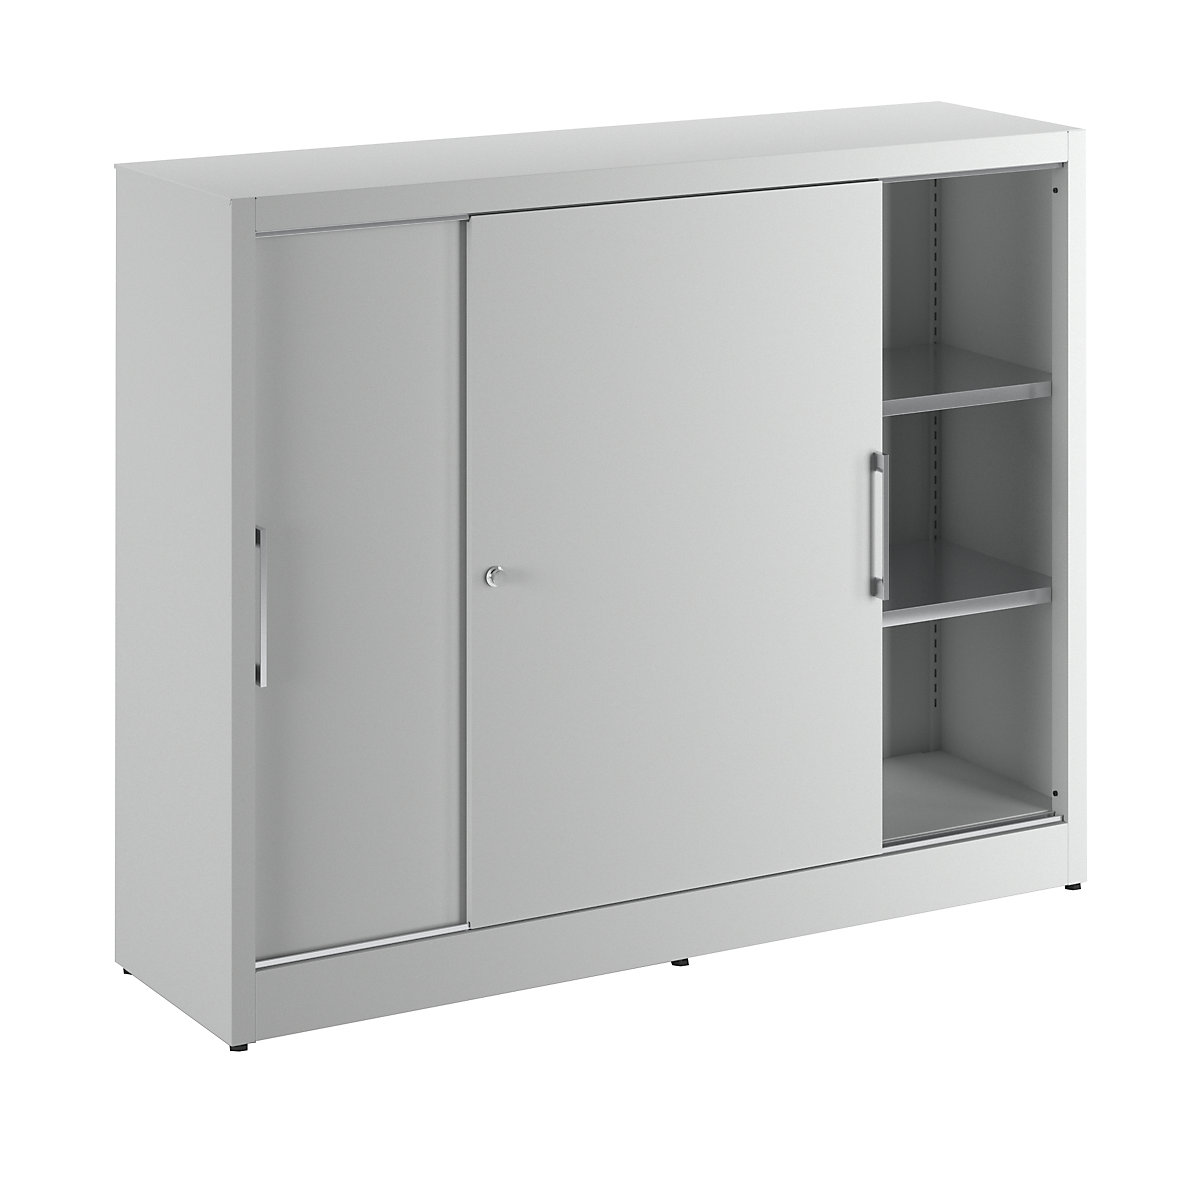 Sliding door cupboard, height 1200 mm – eurokraft pro, with centre partition and 2 x 2 shelves, HxW 1200 x 1500 mm, depth 420 mm, doors in light grey RAL 7035-3